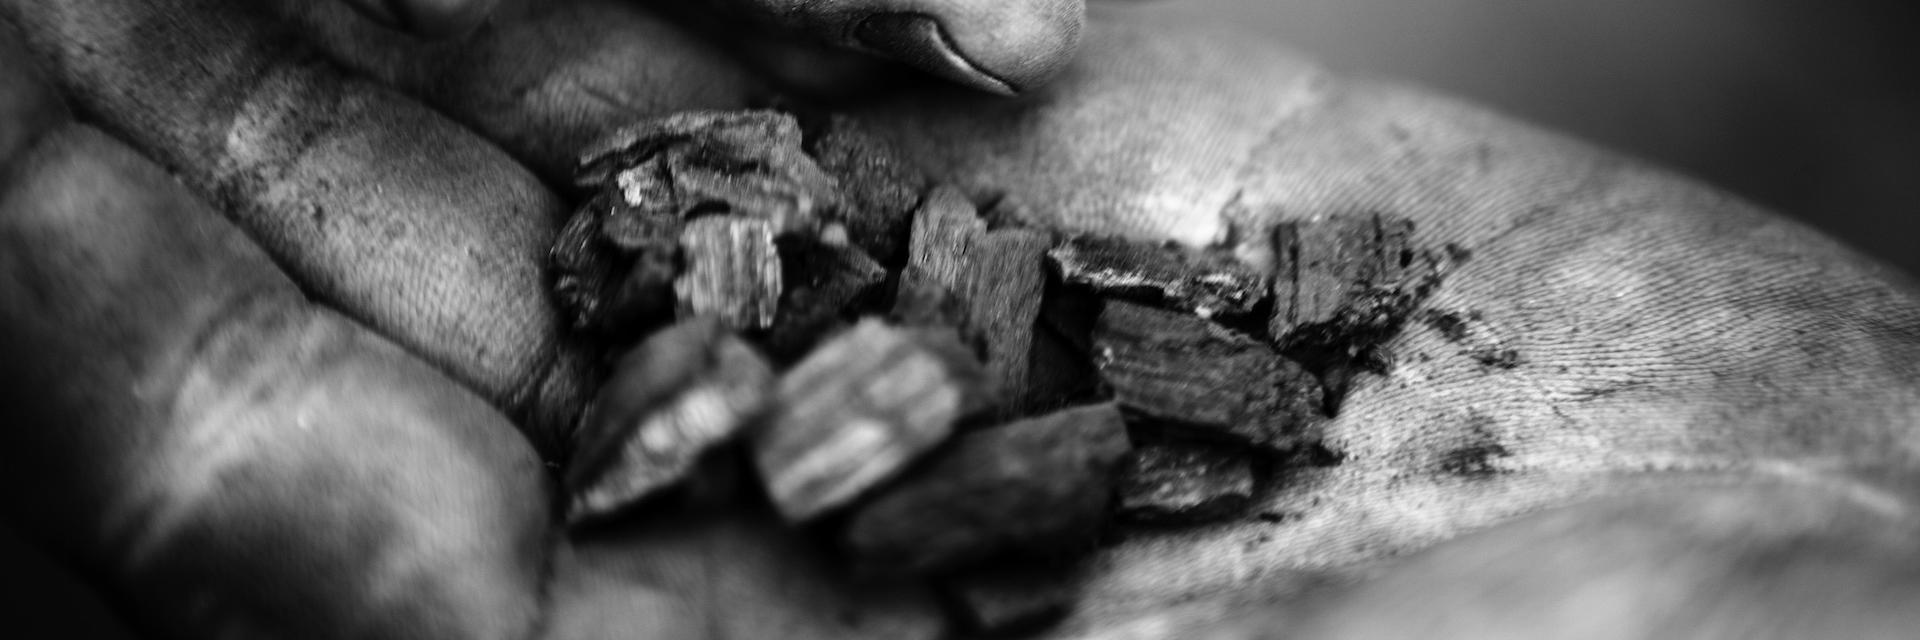 Black and white image of biochar in a man's hands.